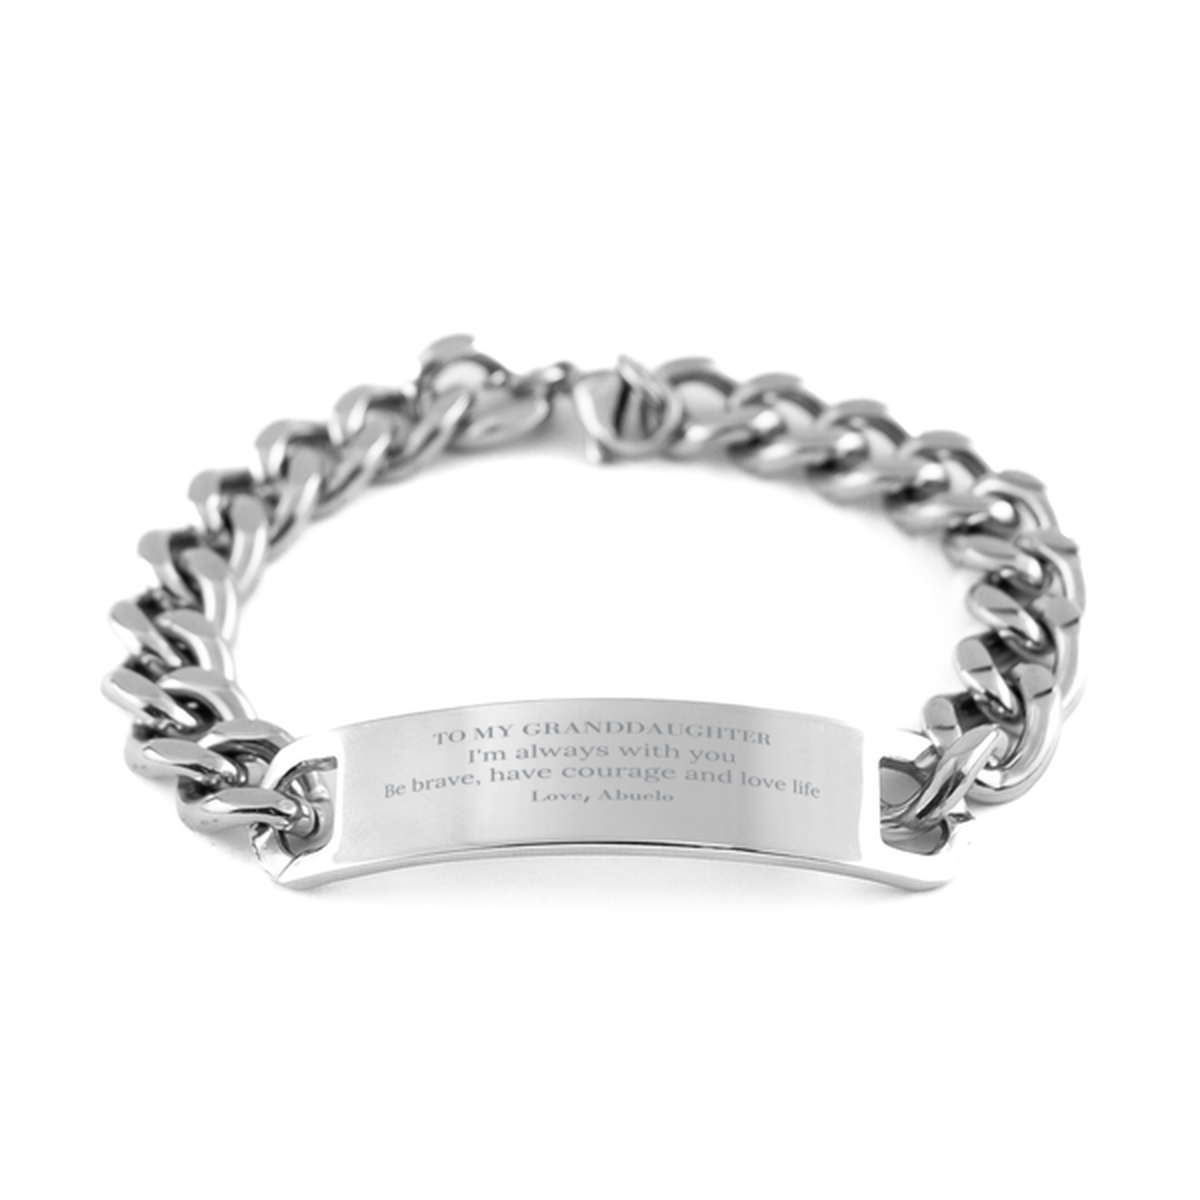 To My Granddaughter Gifts from Abuelo, Unique Cuban Chain Stainless Steel Bracelet Inspirational Christmas Birthday Graduation Gifts for Granddaughter I'm always with you. Be brave, have courage and love life. Love, Abuelo